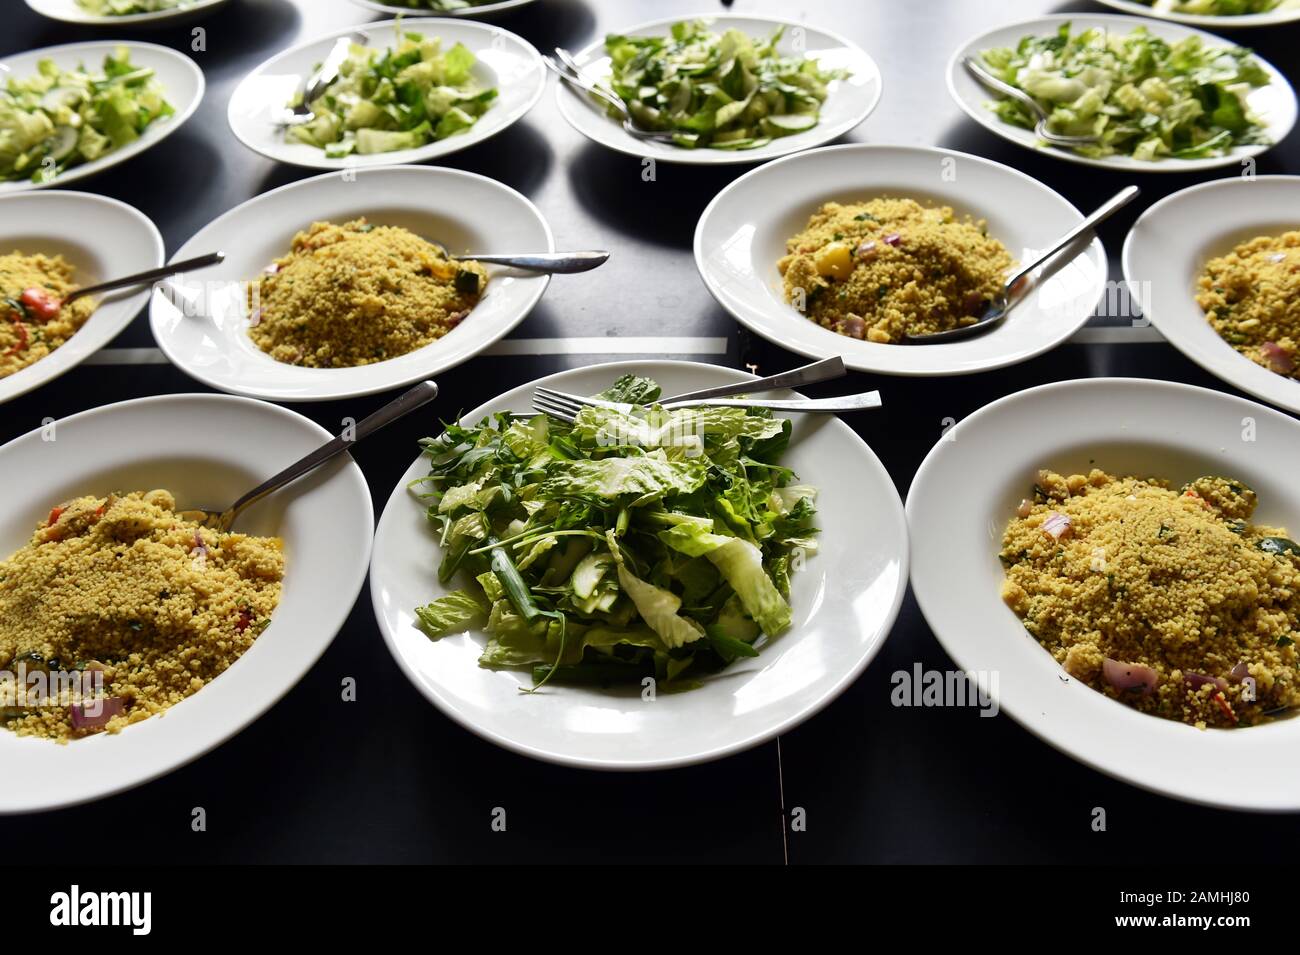 Wedding reception food is laid out ready for the table, couscous and salad in big bowls for sharing. Stock Photo